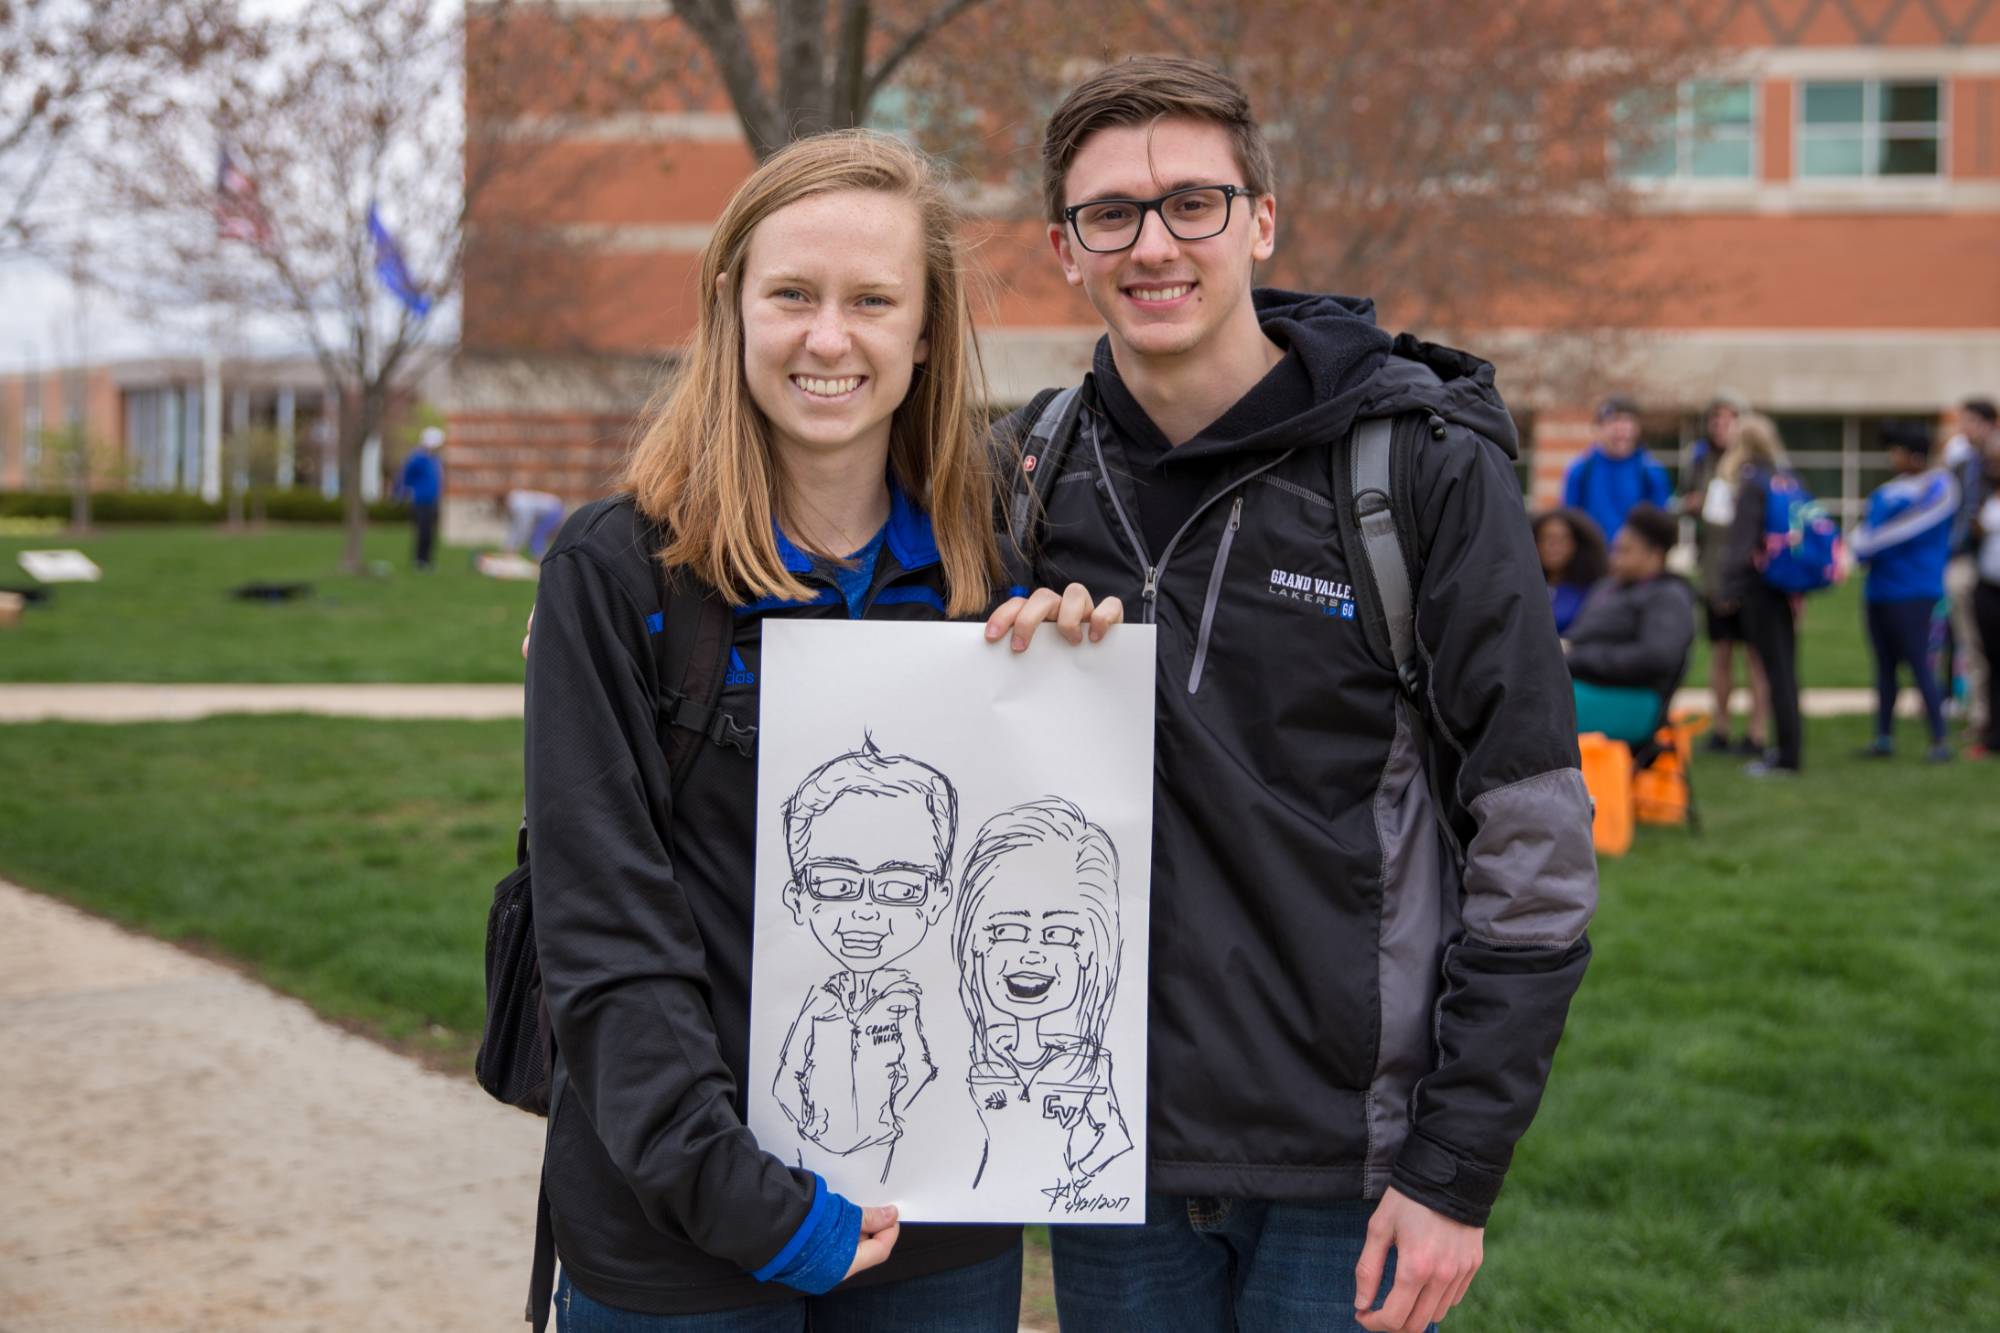 2 GVSU students holding caricatures of themselves at ExtravaGRANDza